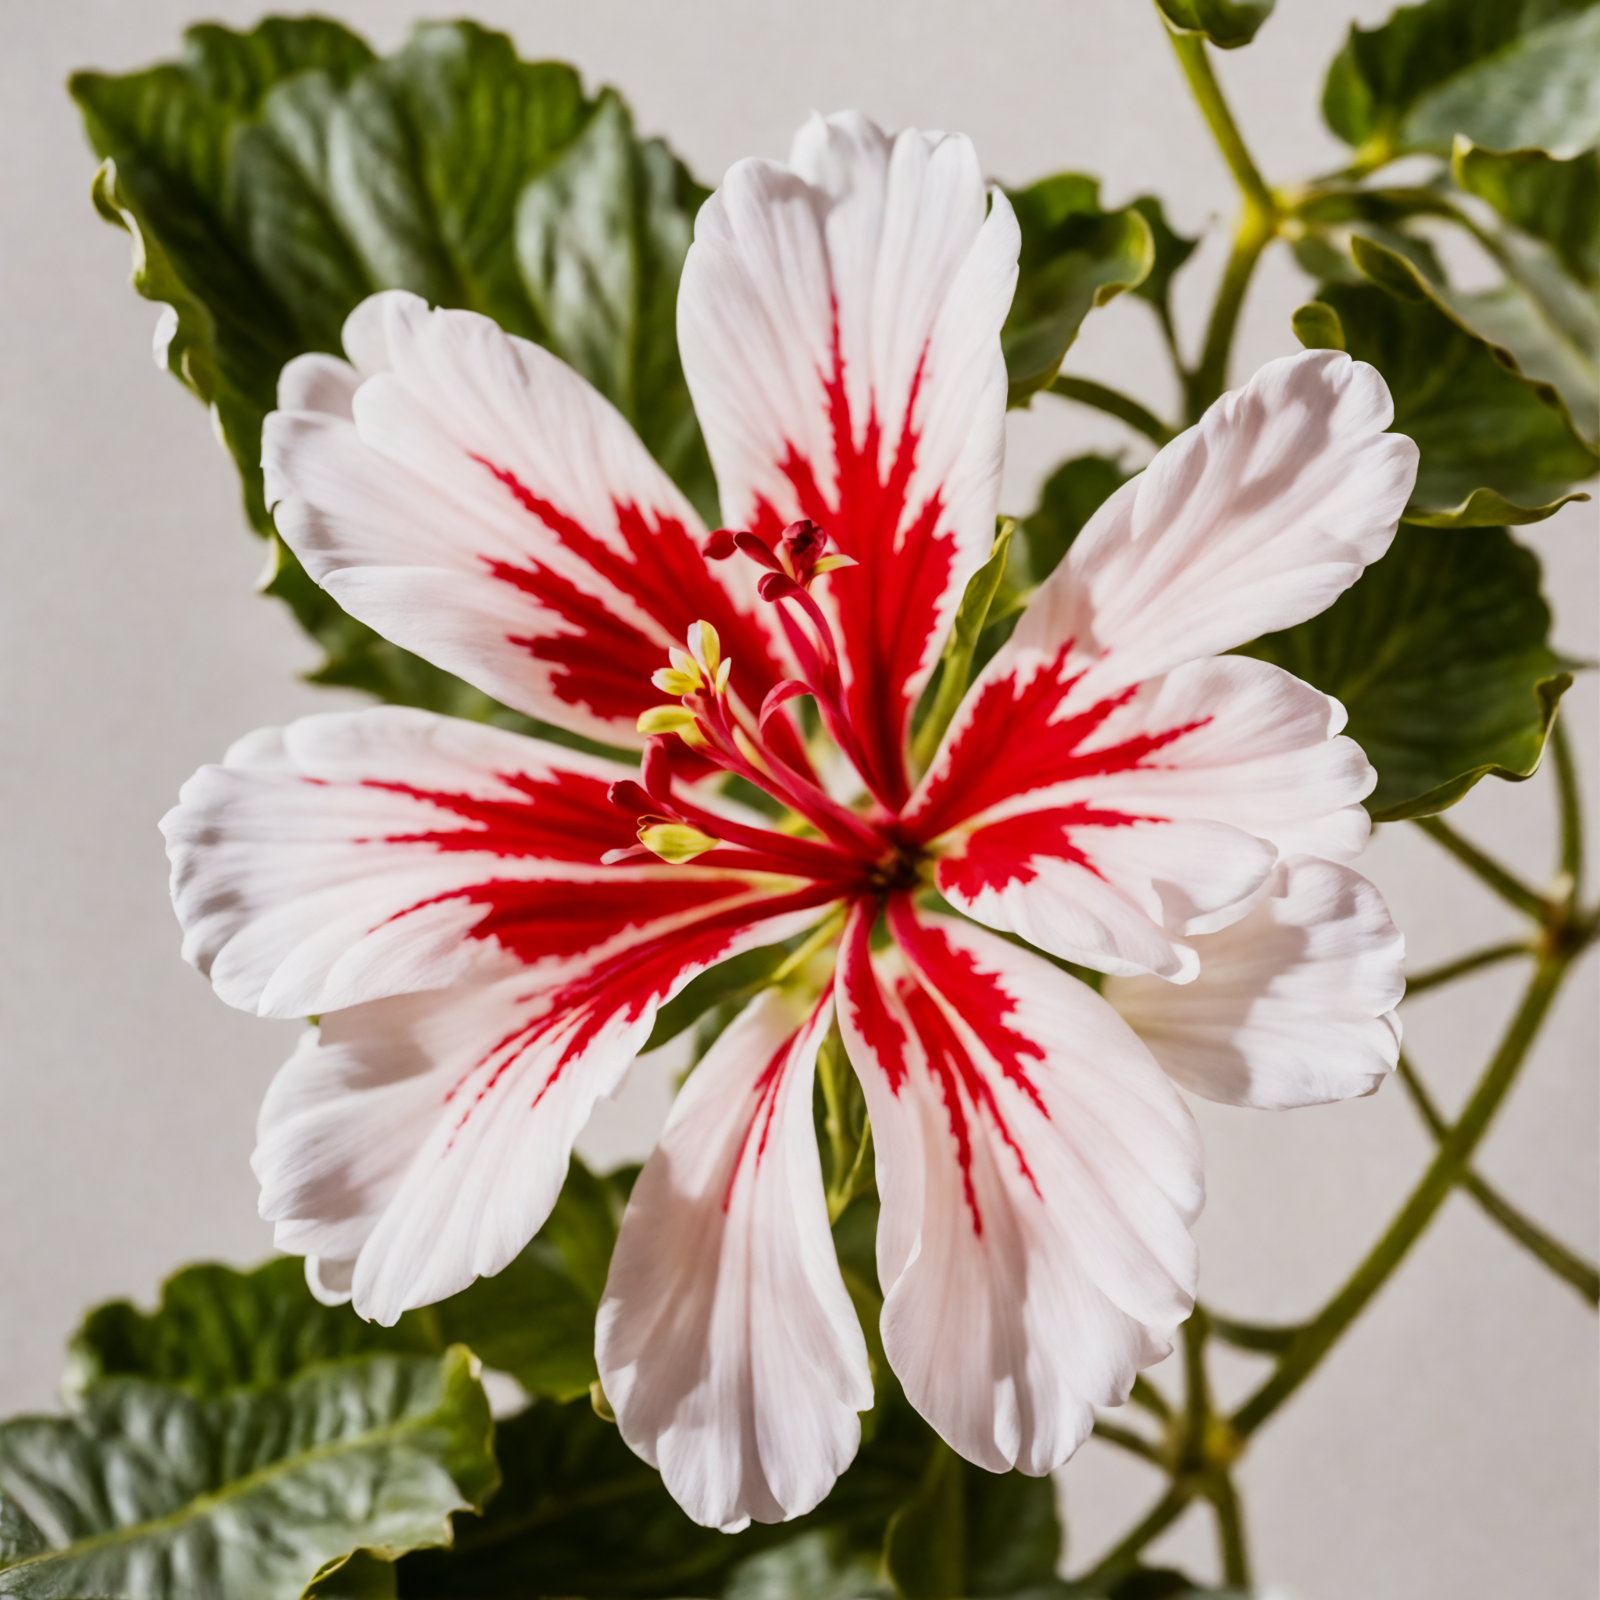 Vibrant Pelargonium peltatum flowers in shades of pink and white, centered on a light background.